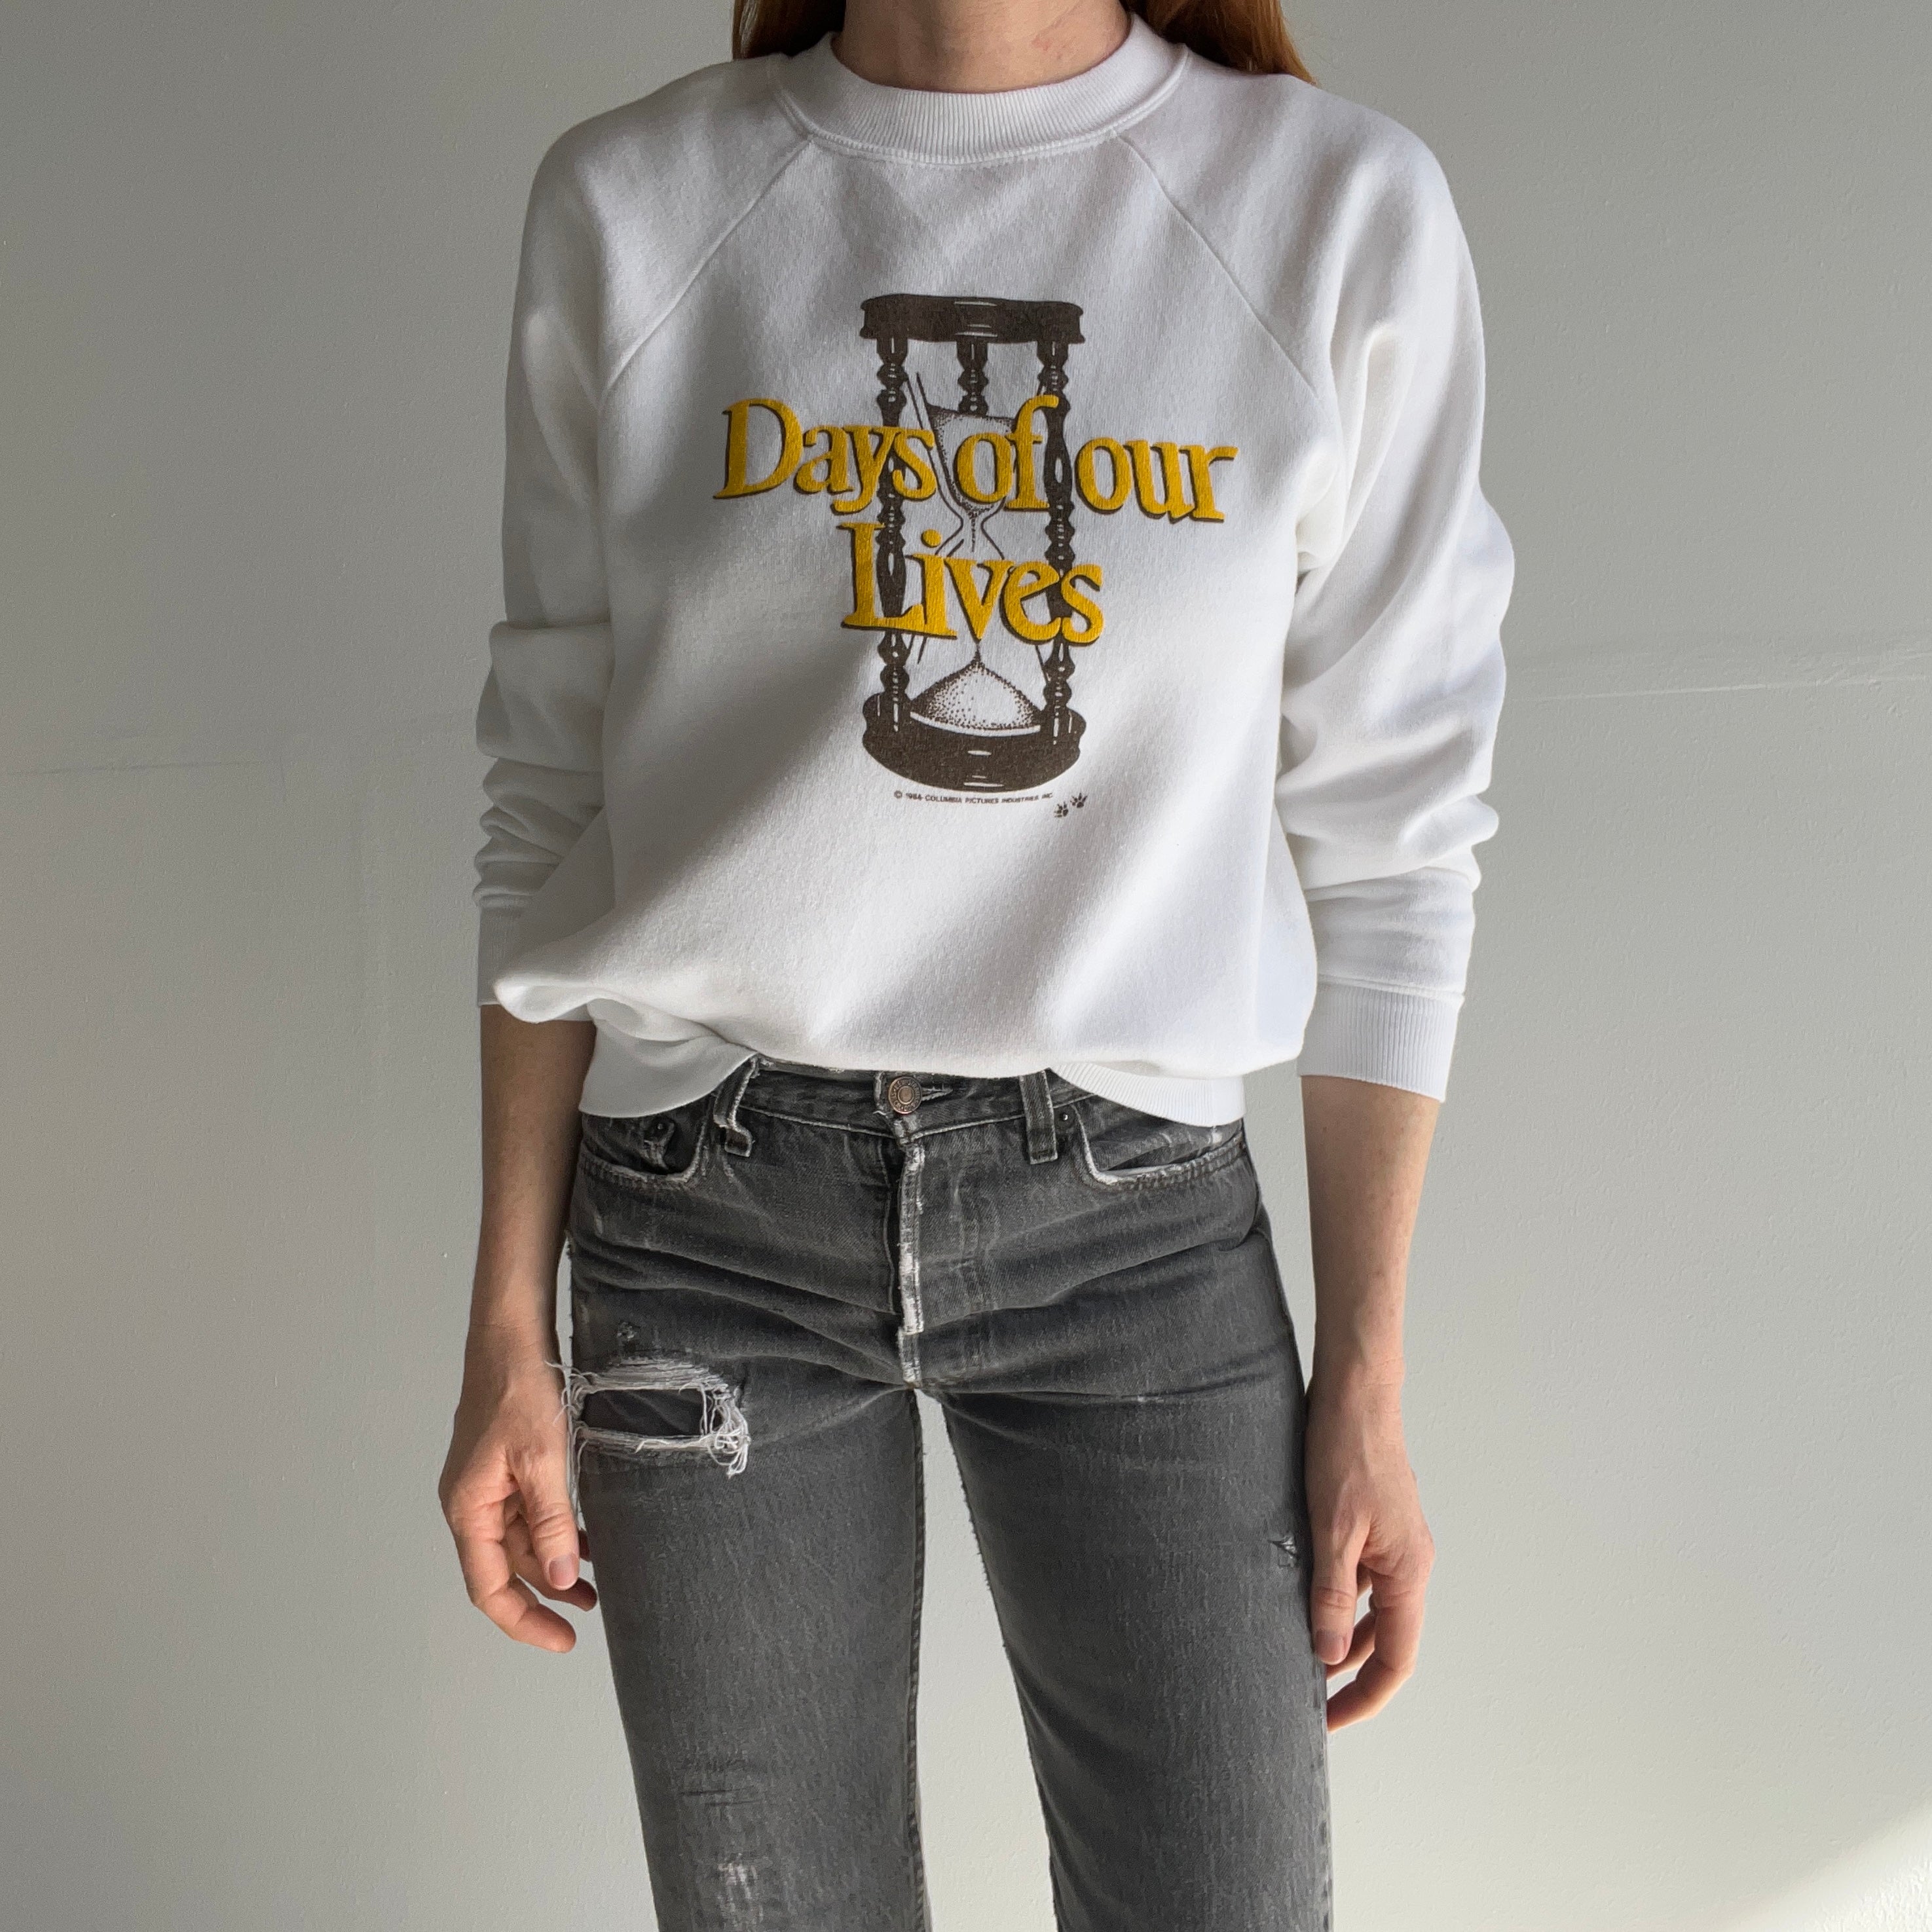 1984 Days of Our Lives Sweatshirt - Yes, That's Right